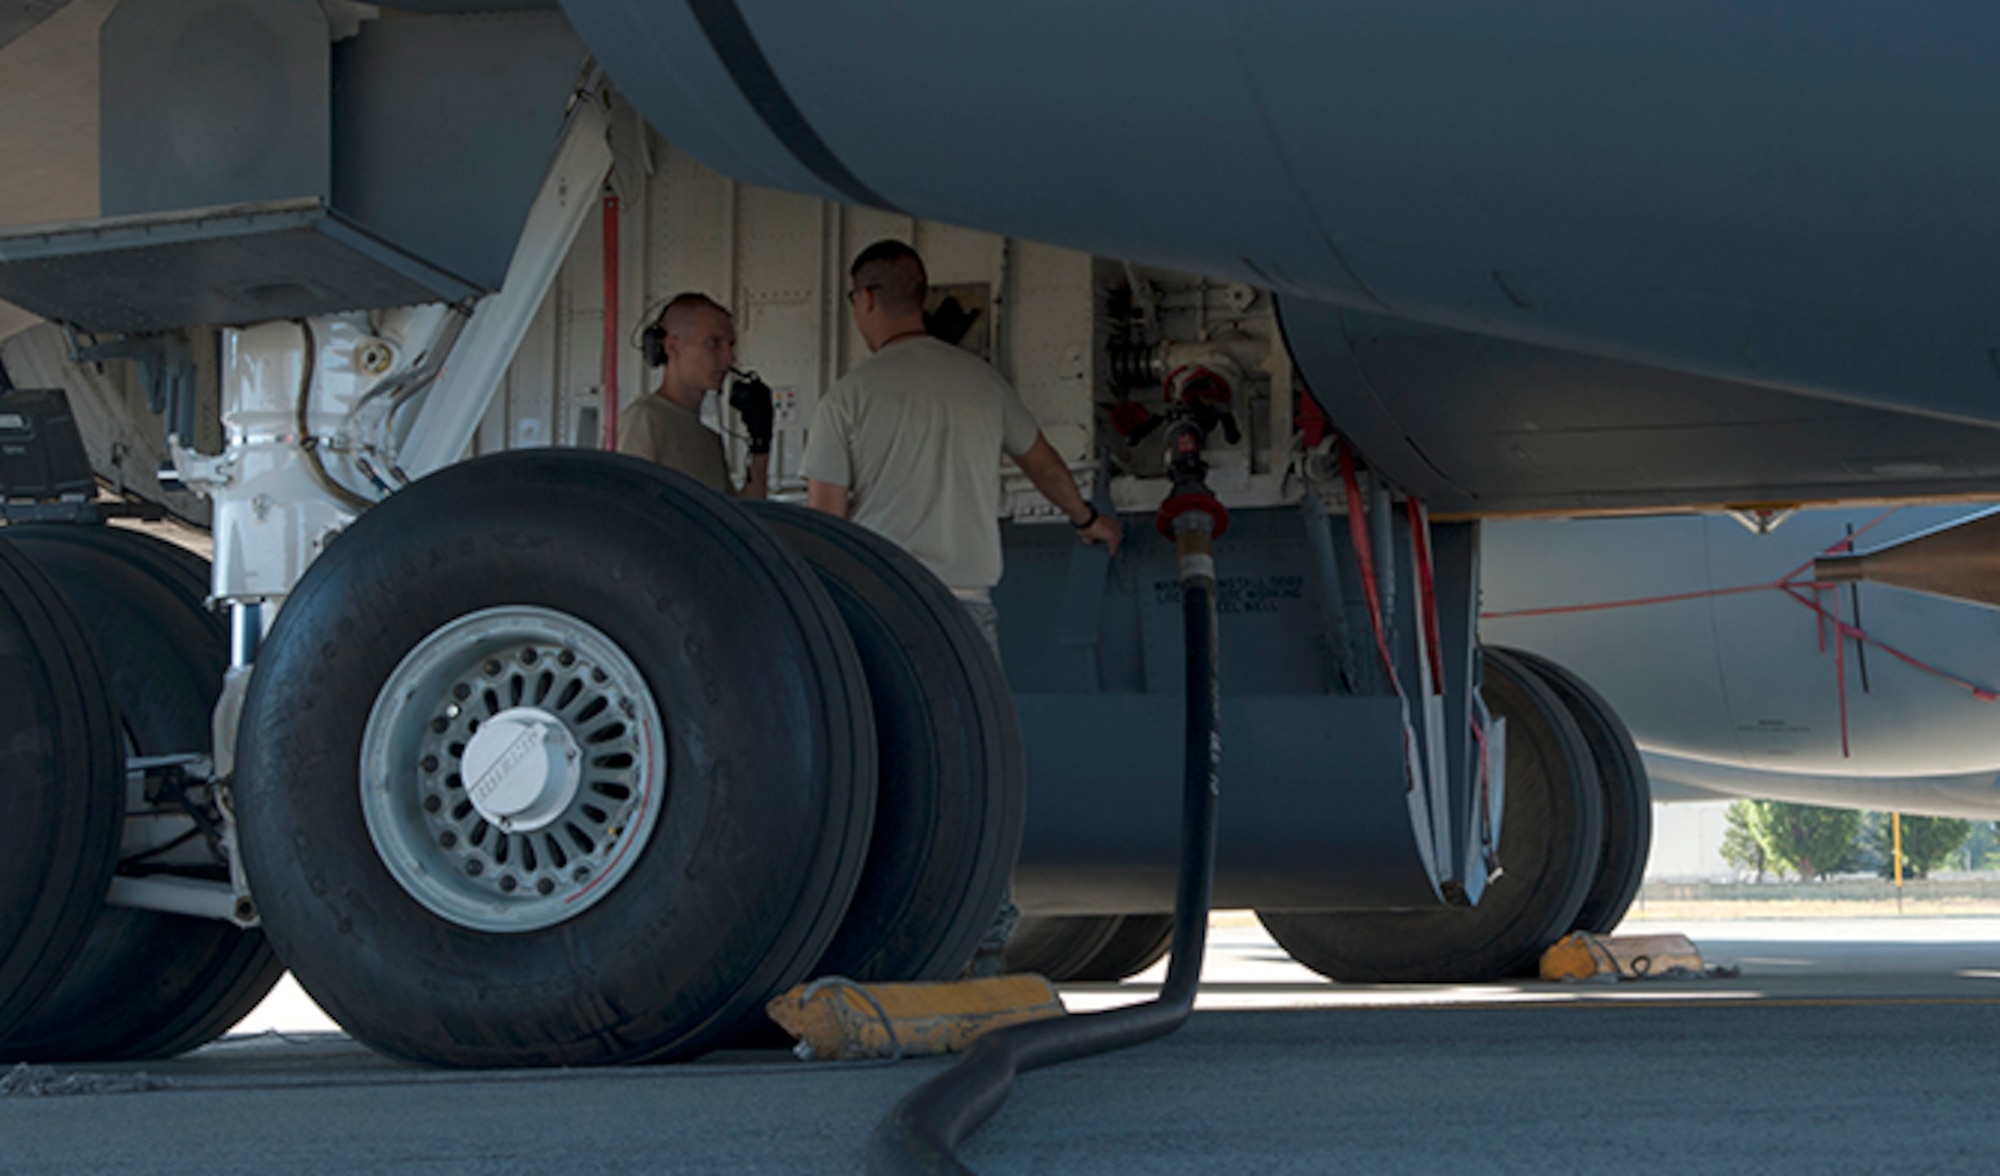 Airman 1st Class Thomas Fisher, 92nd Maintenance Group crew chief, discusses checklist items with another crew chief as his assigned KC-135 is being refueled Aug. 16, 2016, at Fairchild Air Force Base, Wash. Refueling actions on a dry KC-135 may take approximately an hour or longer depending on the demand for fuel at a given time. (U.S. Air Force photo/ Airman 1st Class Ryan Lackey)